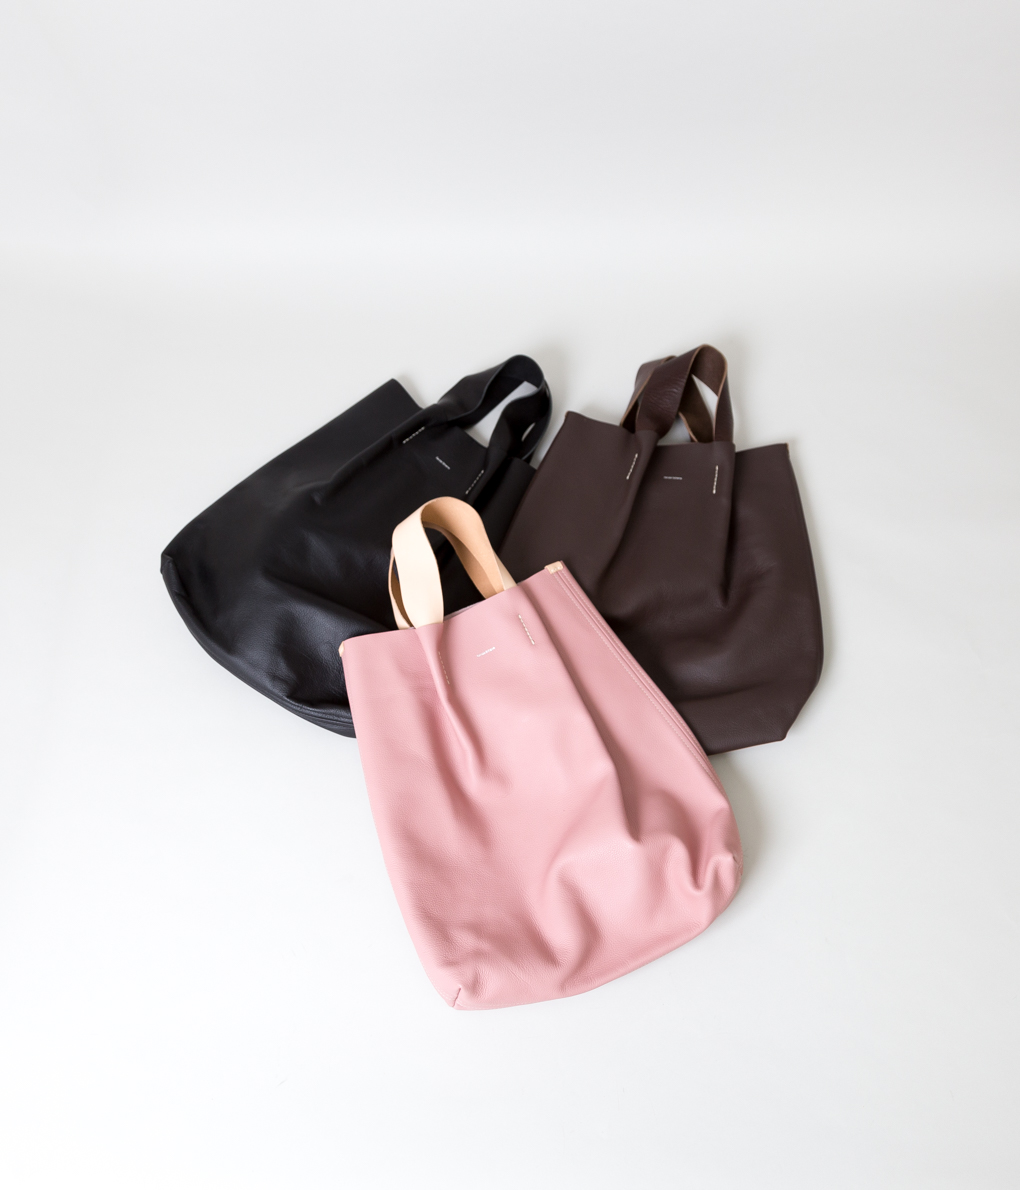 New Arrival “Hender Scheme Piano bag” | well-made by MAIDENS SHOP